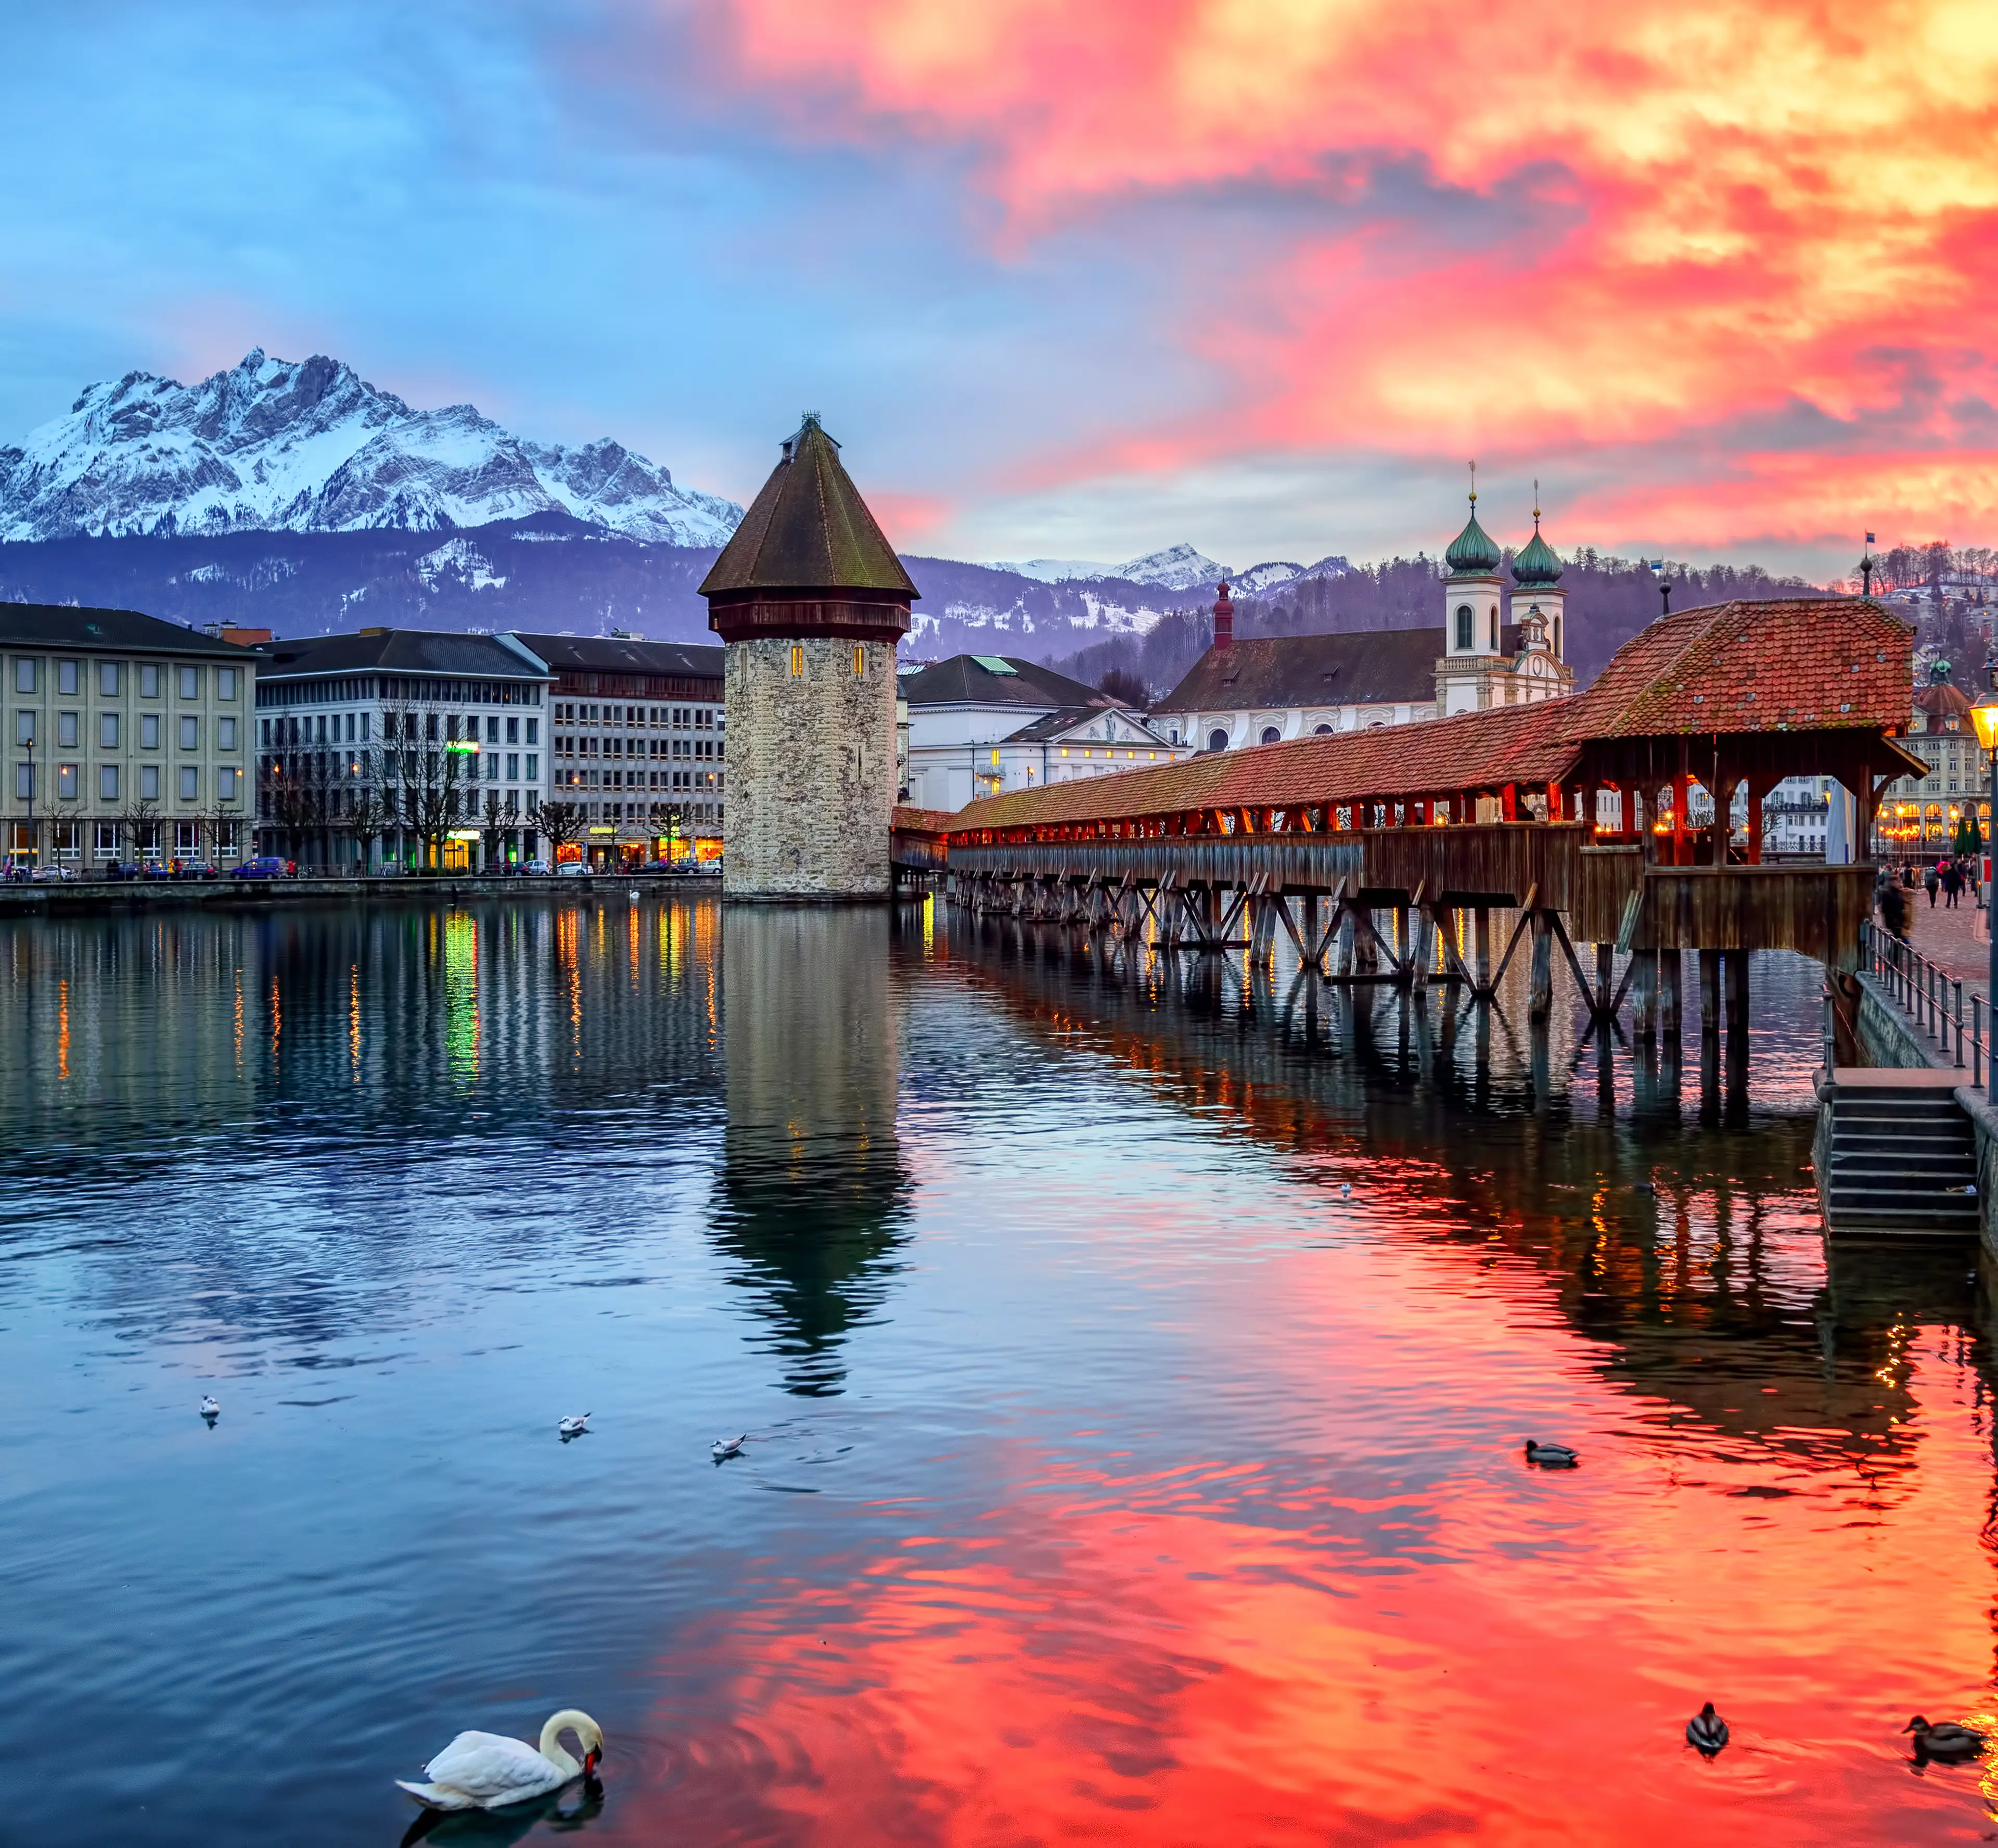 3-Day Dream Holiday Guide to Lucerne, Switzerland